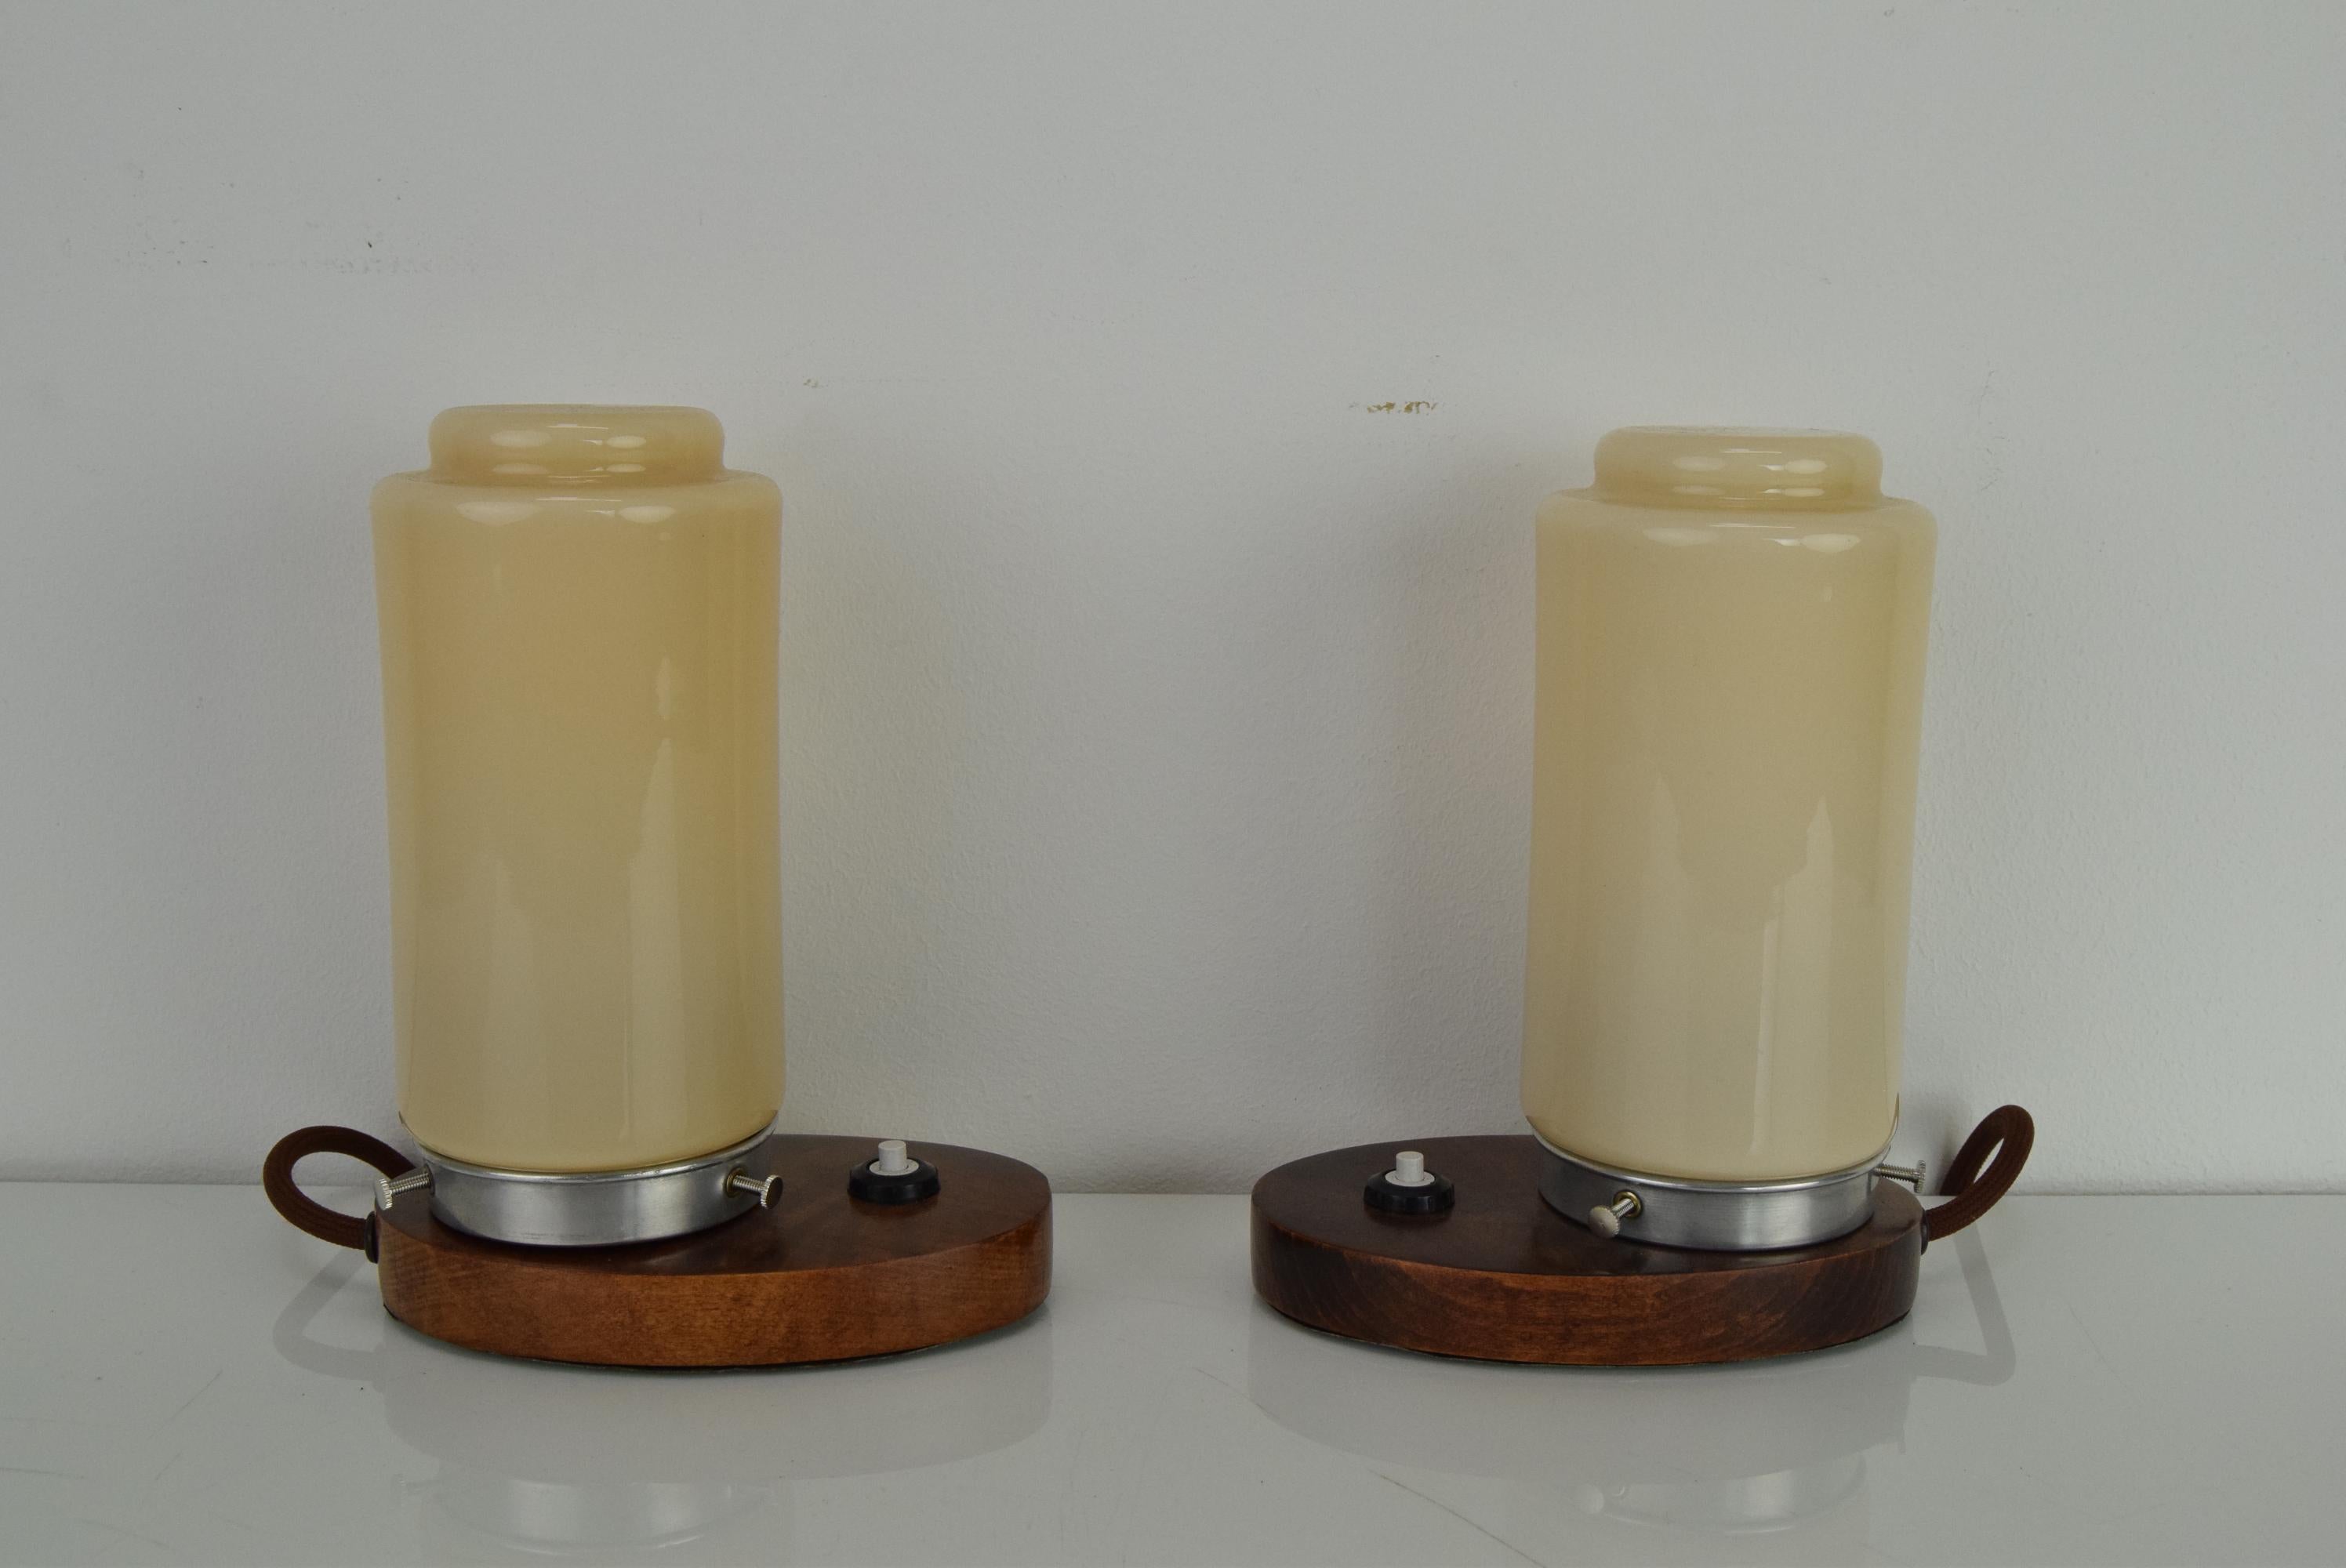 Made in Czechoslovakia
Made of Glass,Wood,Metal
The lamps were completely disasembled and cleaned, new electricity was installed, the wood has been restored 
2xE27 or E26 bulb
US adapter included
Good Original condition.